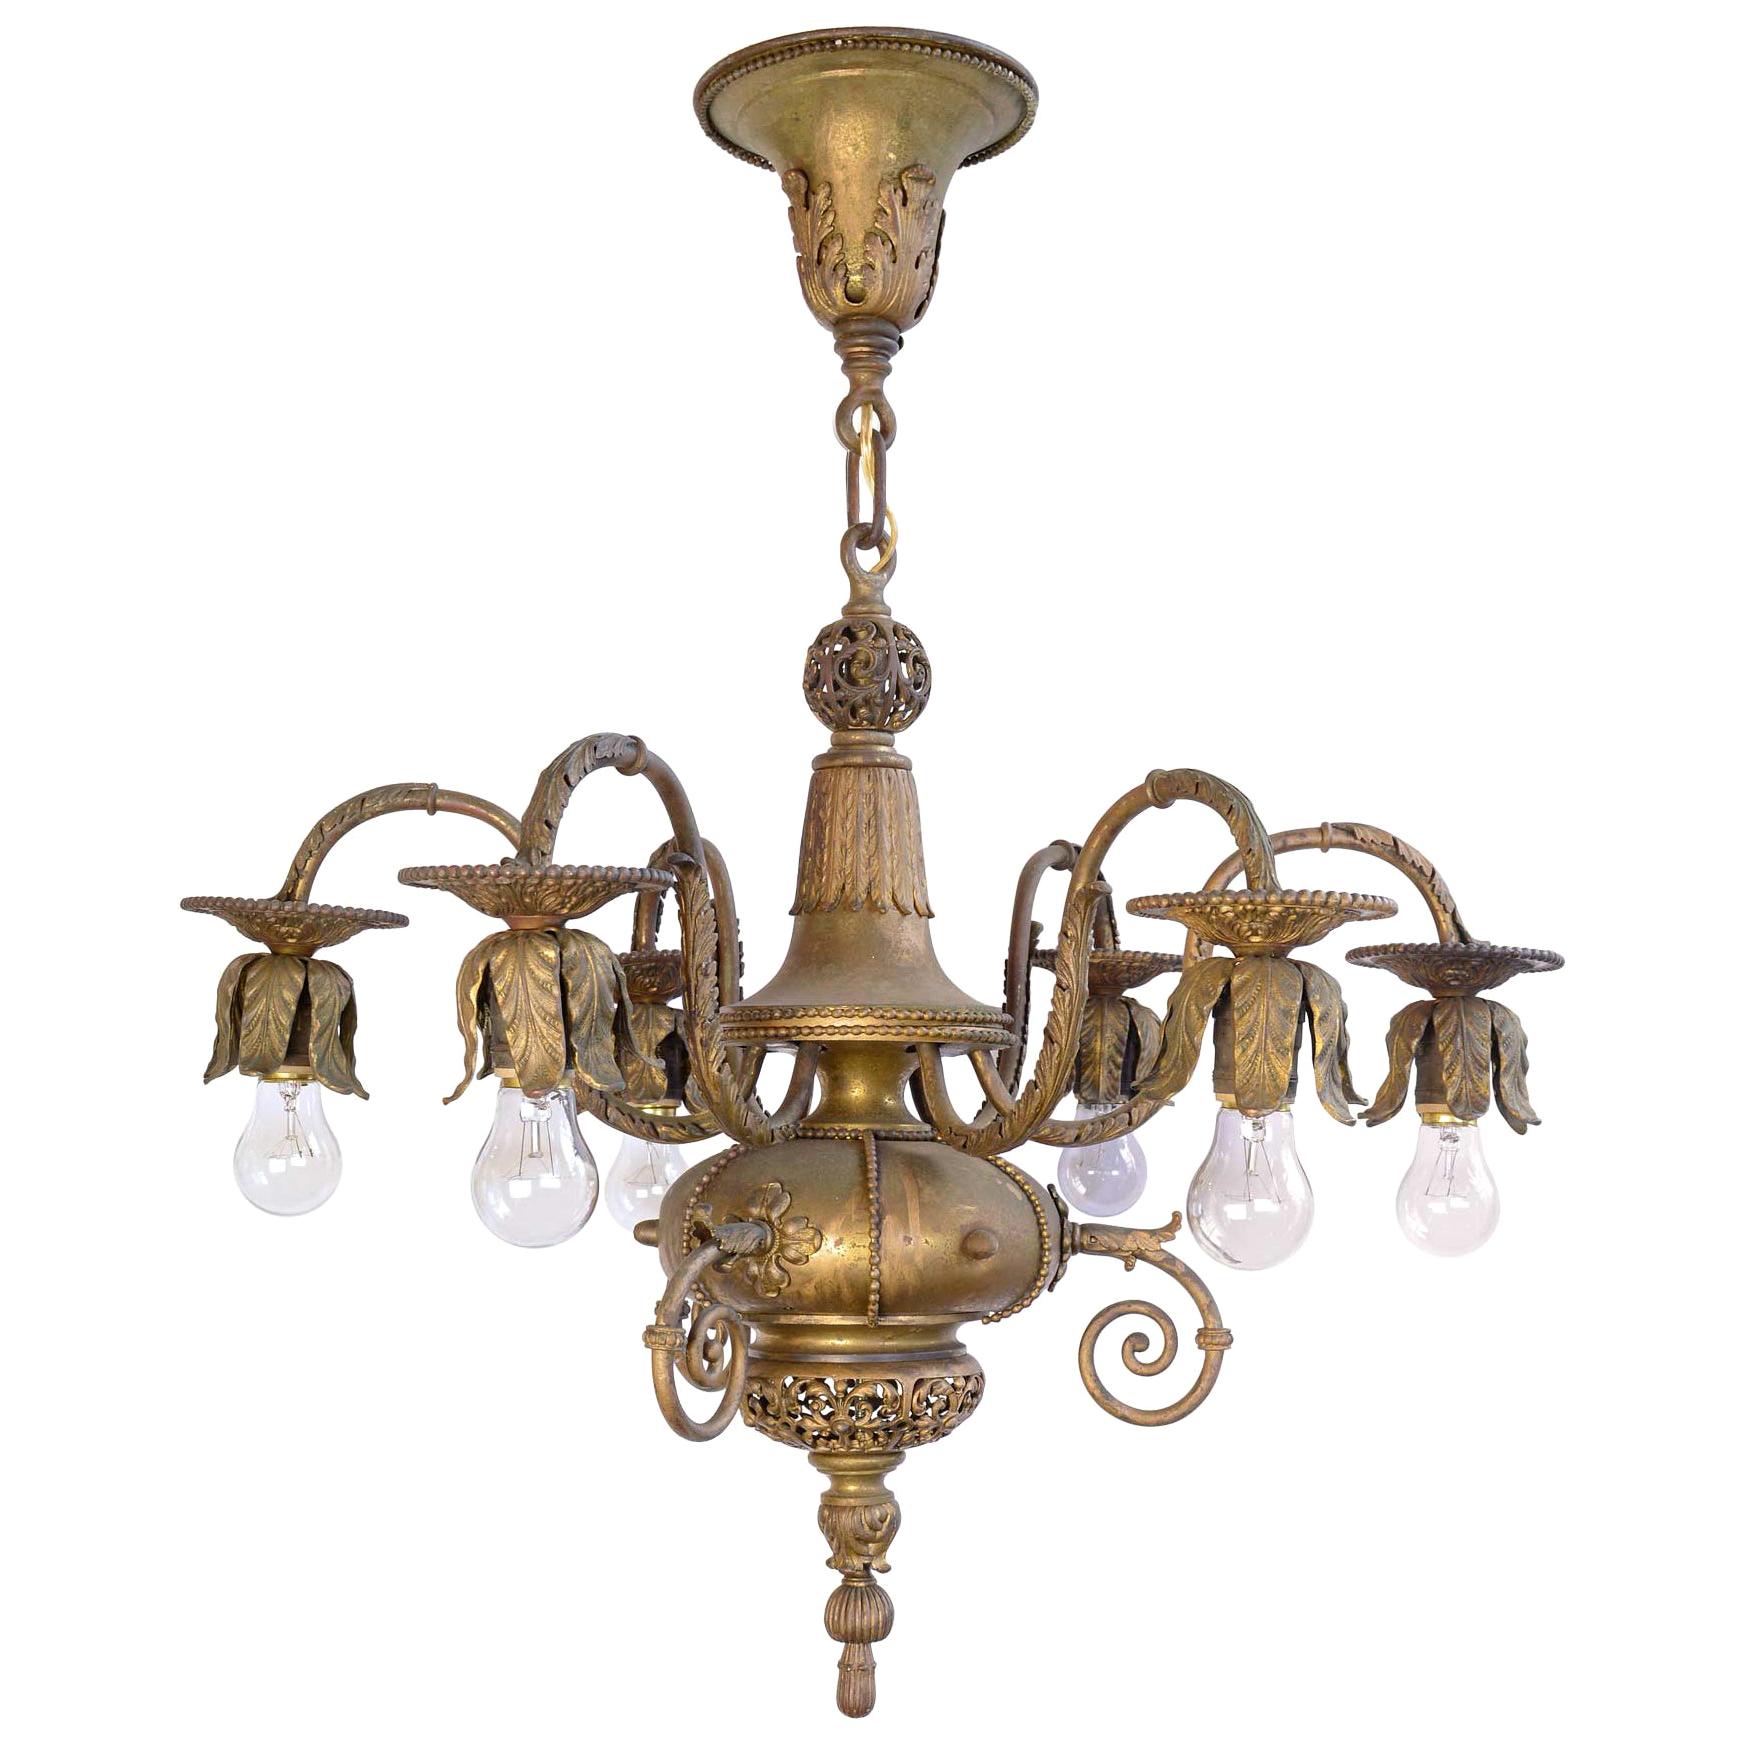 Early 1890s American Silver Plated Six-Candle Chandelier with Filigree